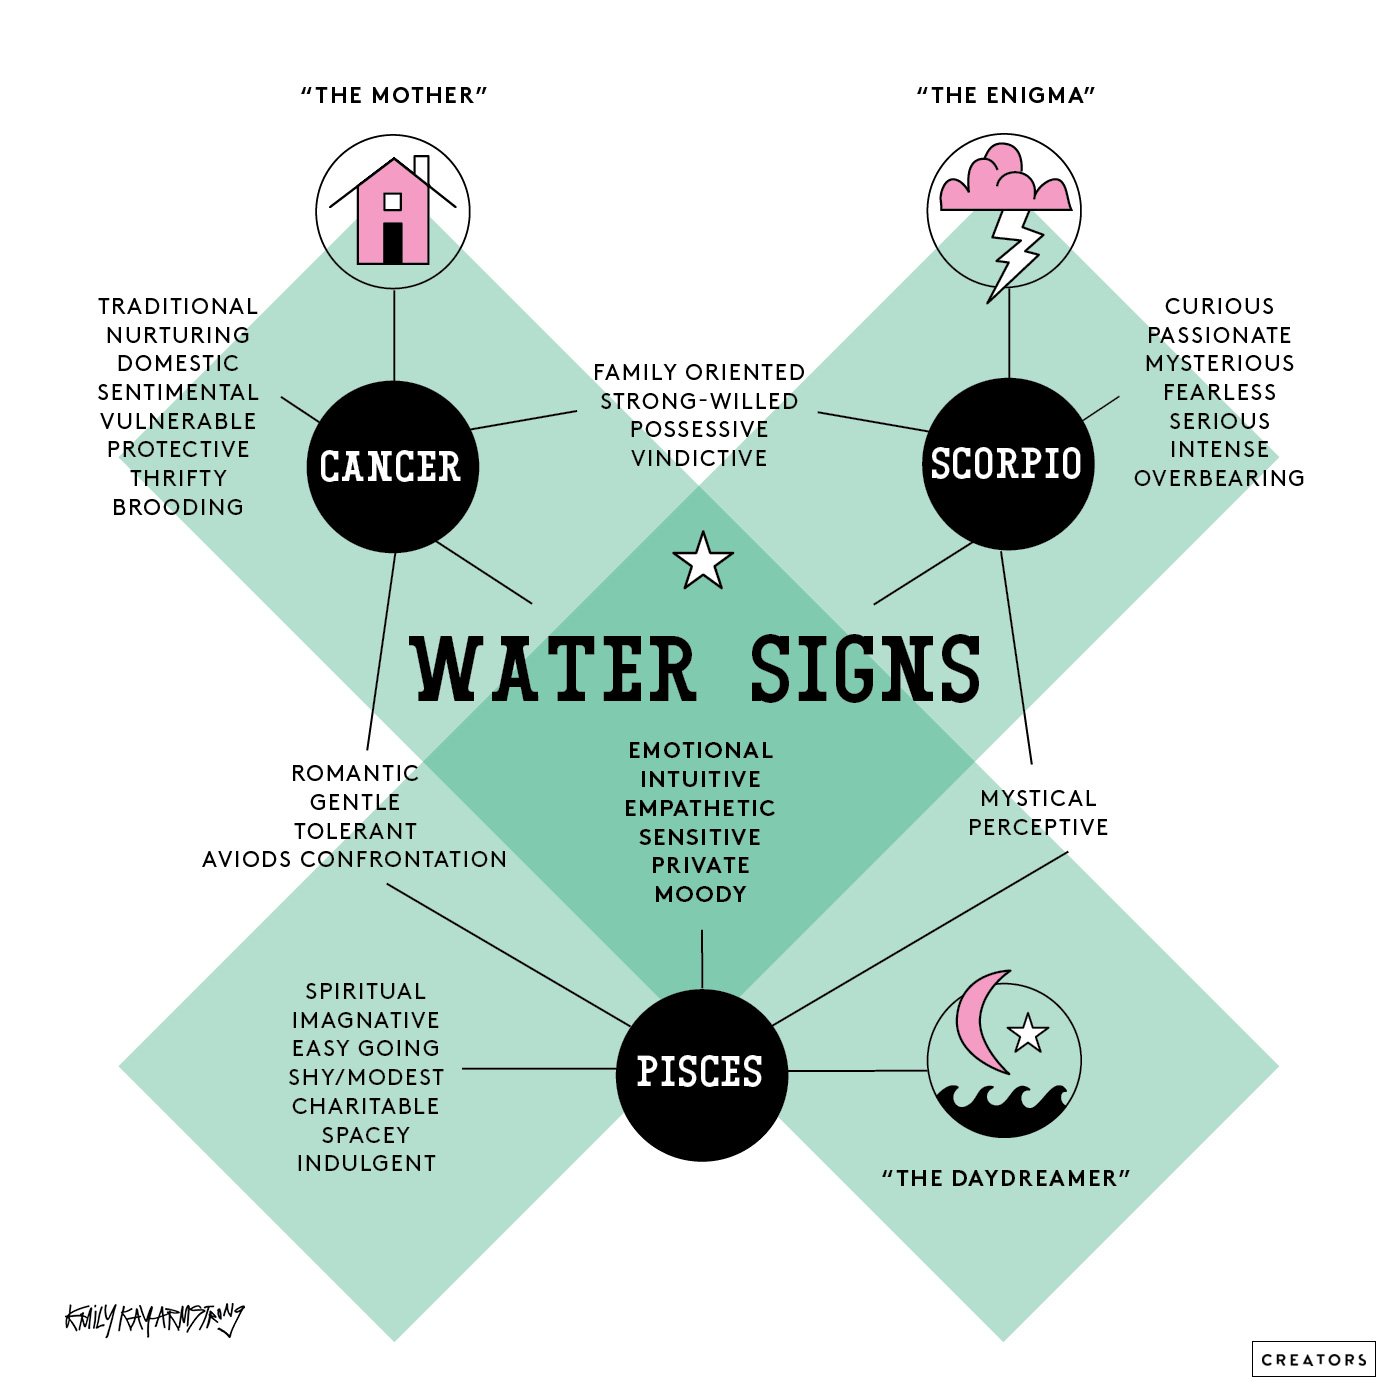 What Zodiacs are water signs?